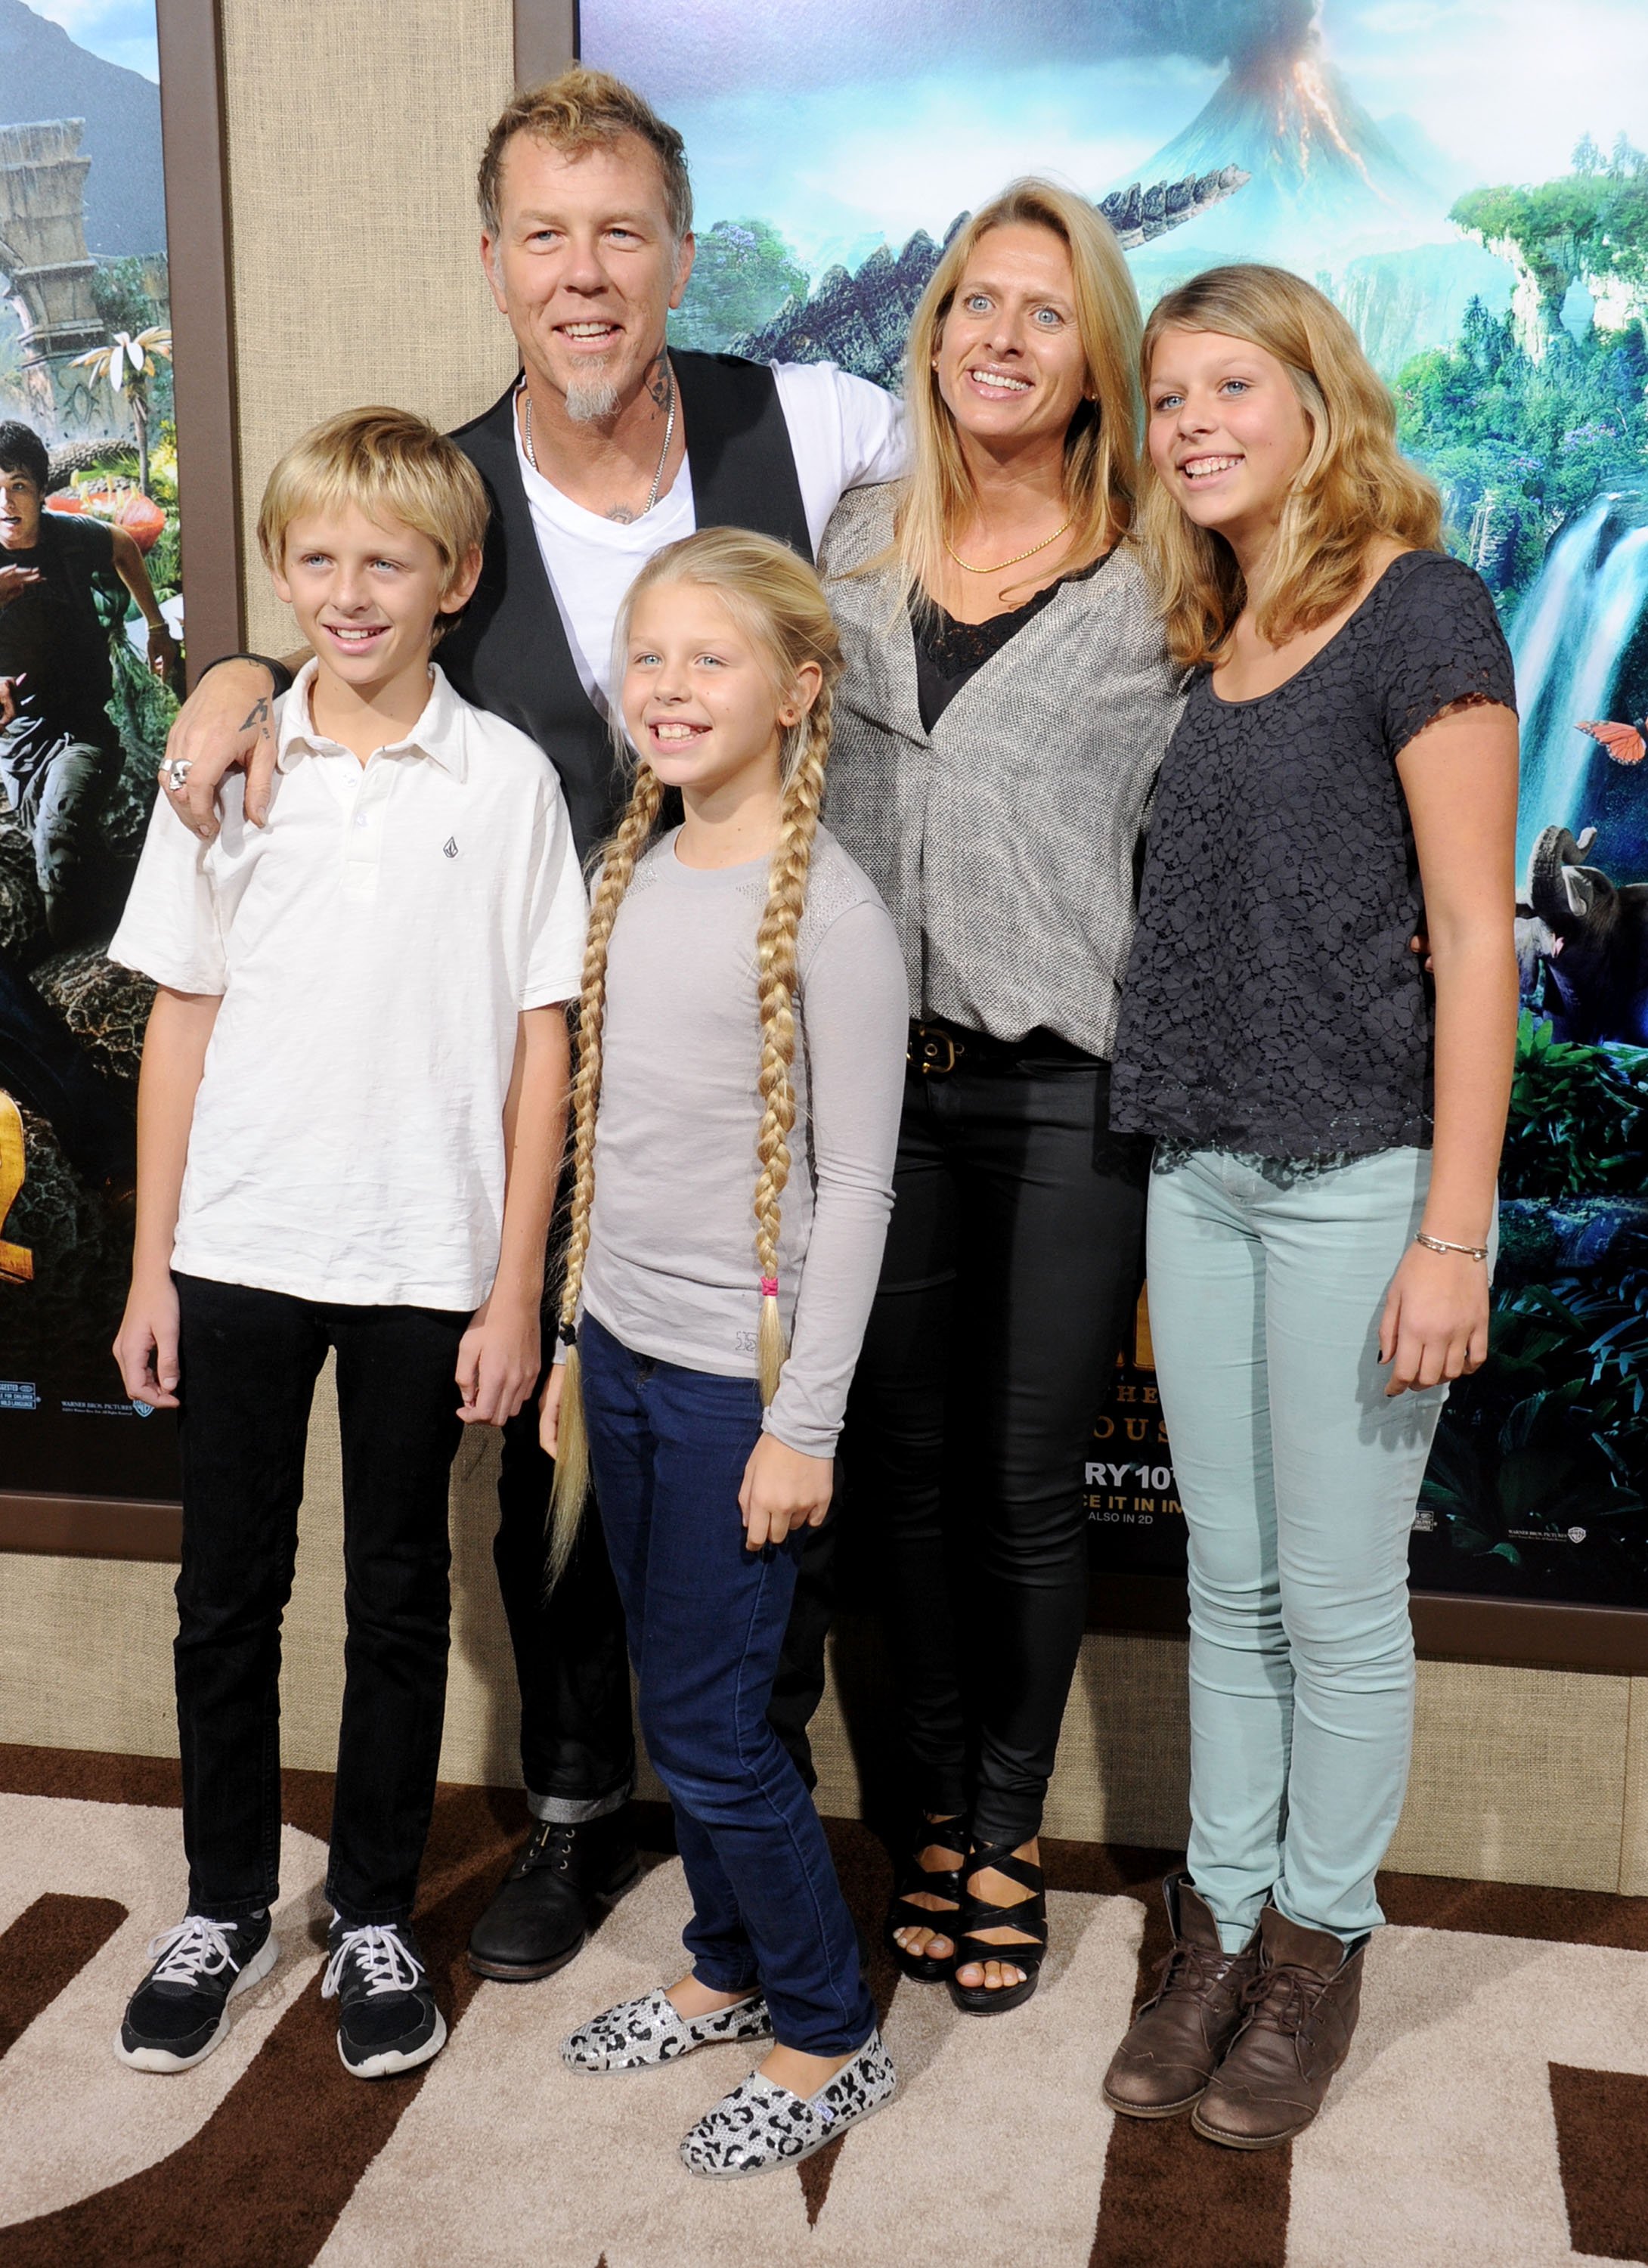 James Hetfield, his wife Francesca Hetfield and theor three children attend the "Journey 2: The Mysterious Island" premiere at Grauman's Chinese Theatre on February 2, 2012, in Hollywood, California. | Source: Getty Images